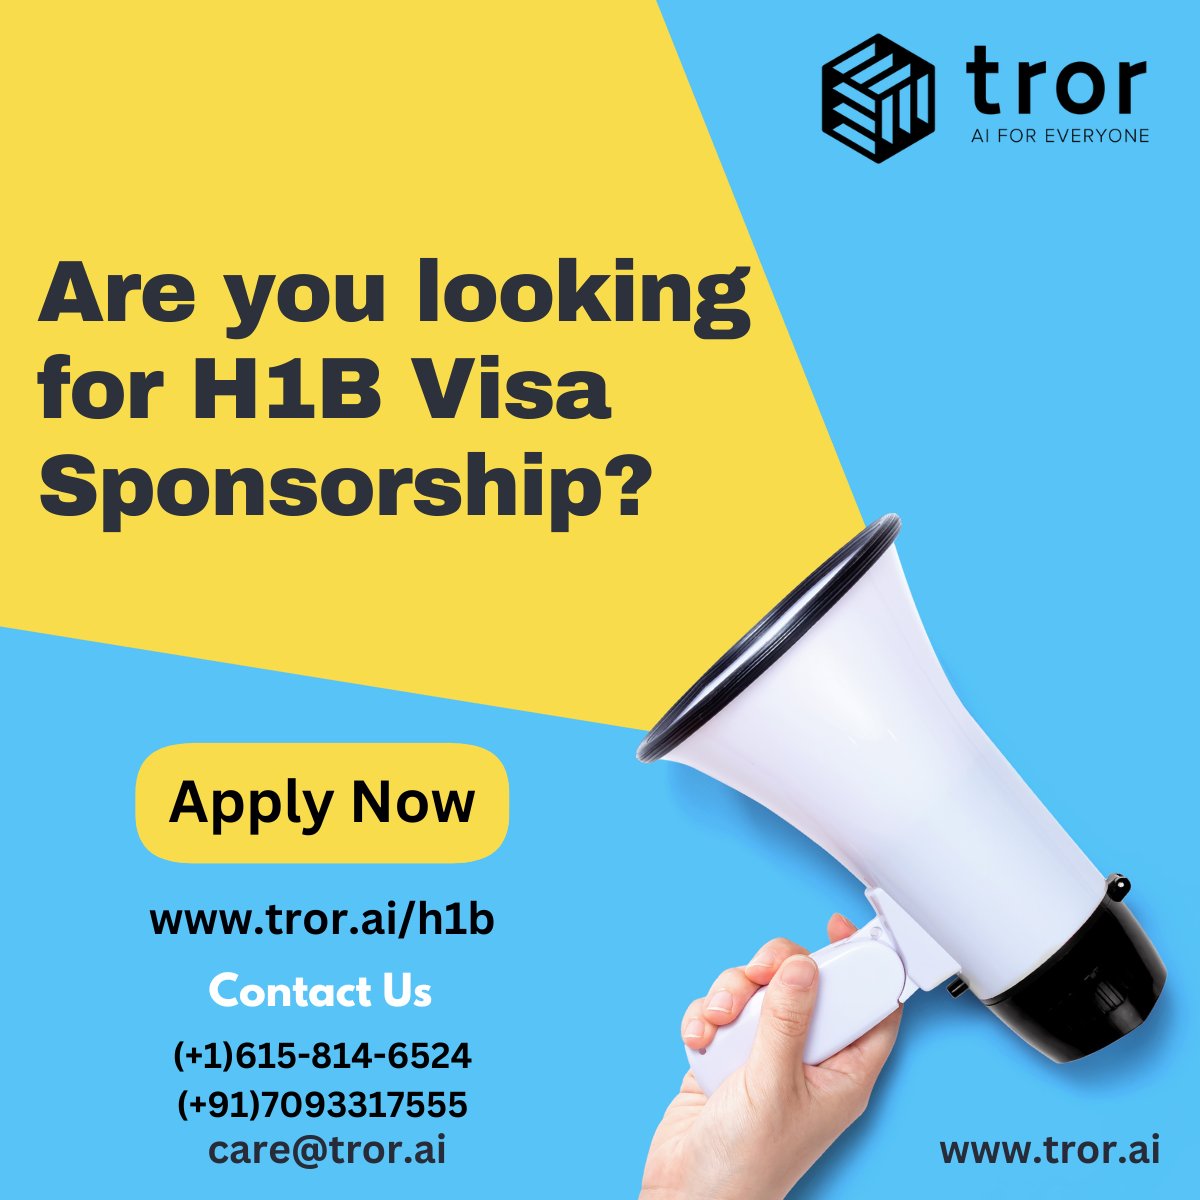 Are you looking for H1B Visa Sponsorship?
Apply now to get one-
tror.ai/h1b

#H1BVisa #h1bjobs #H1bsponsorship #H1B #h1btransfer #h1blottery